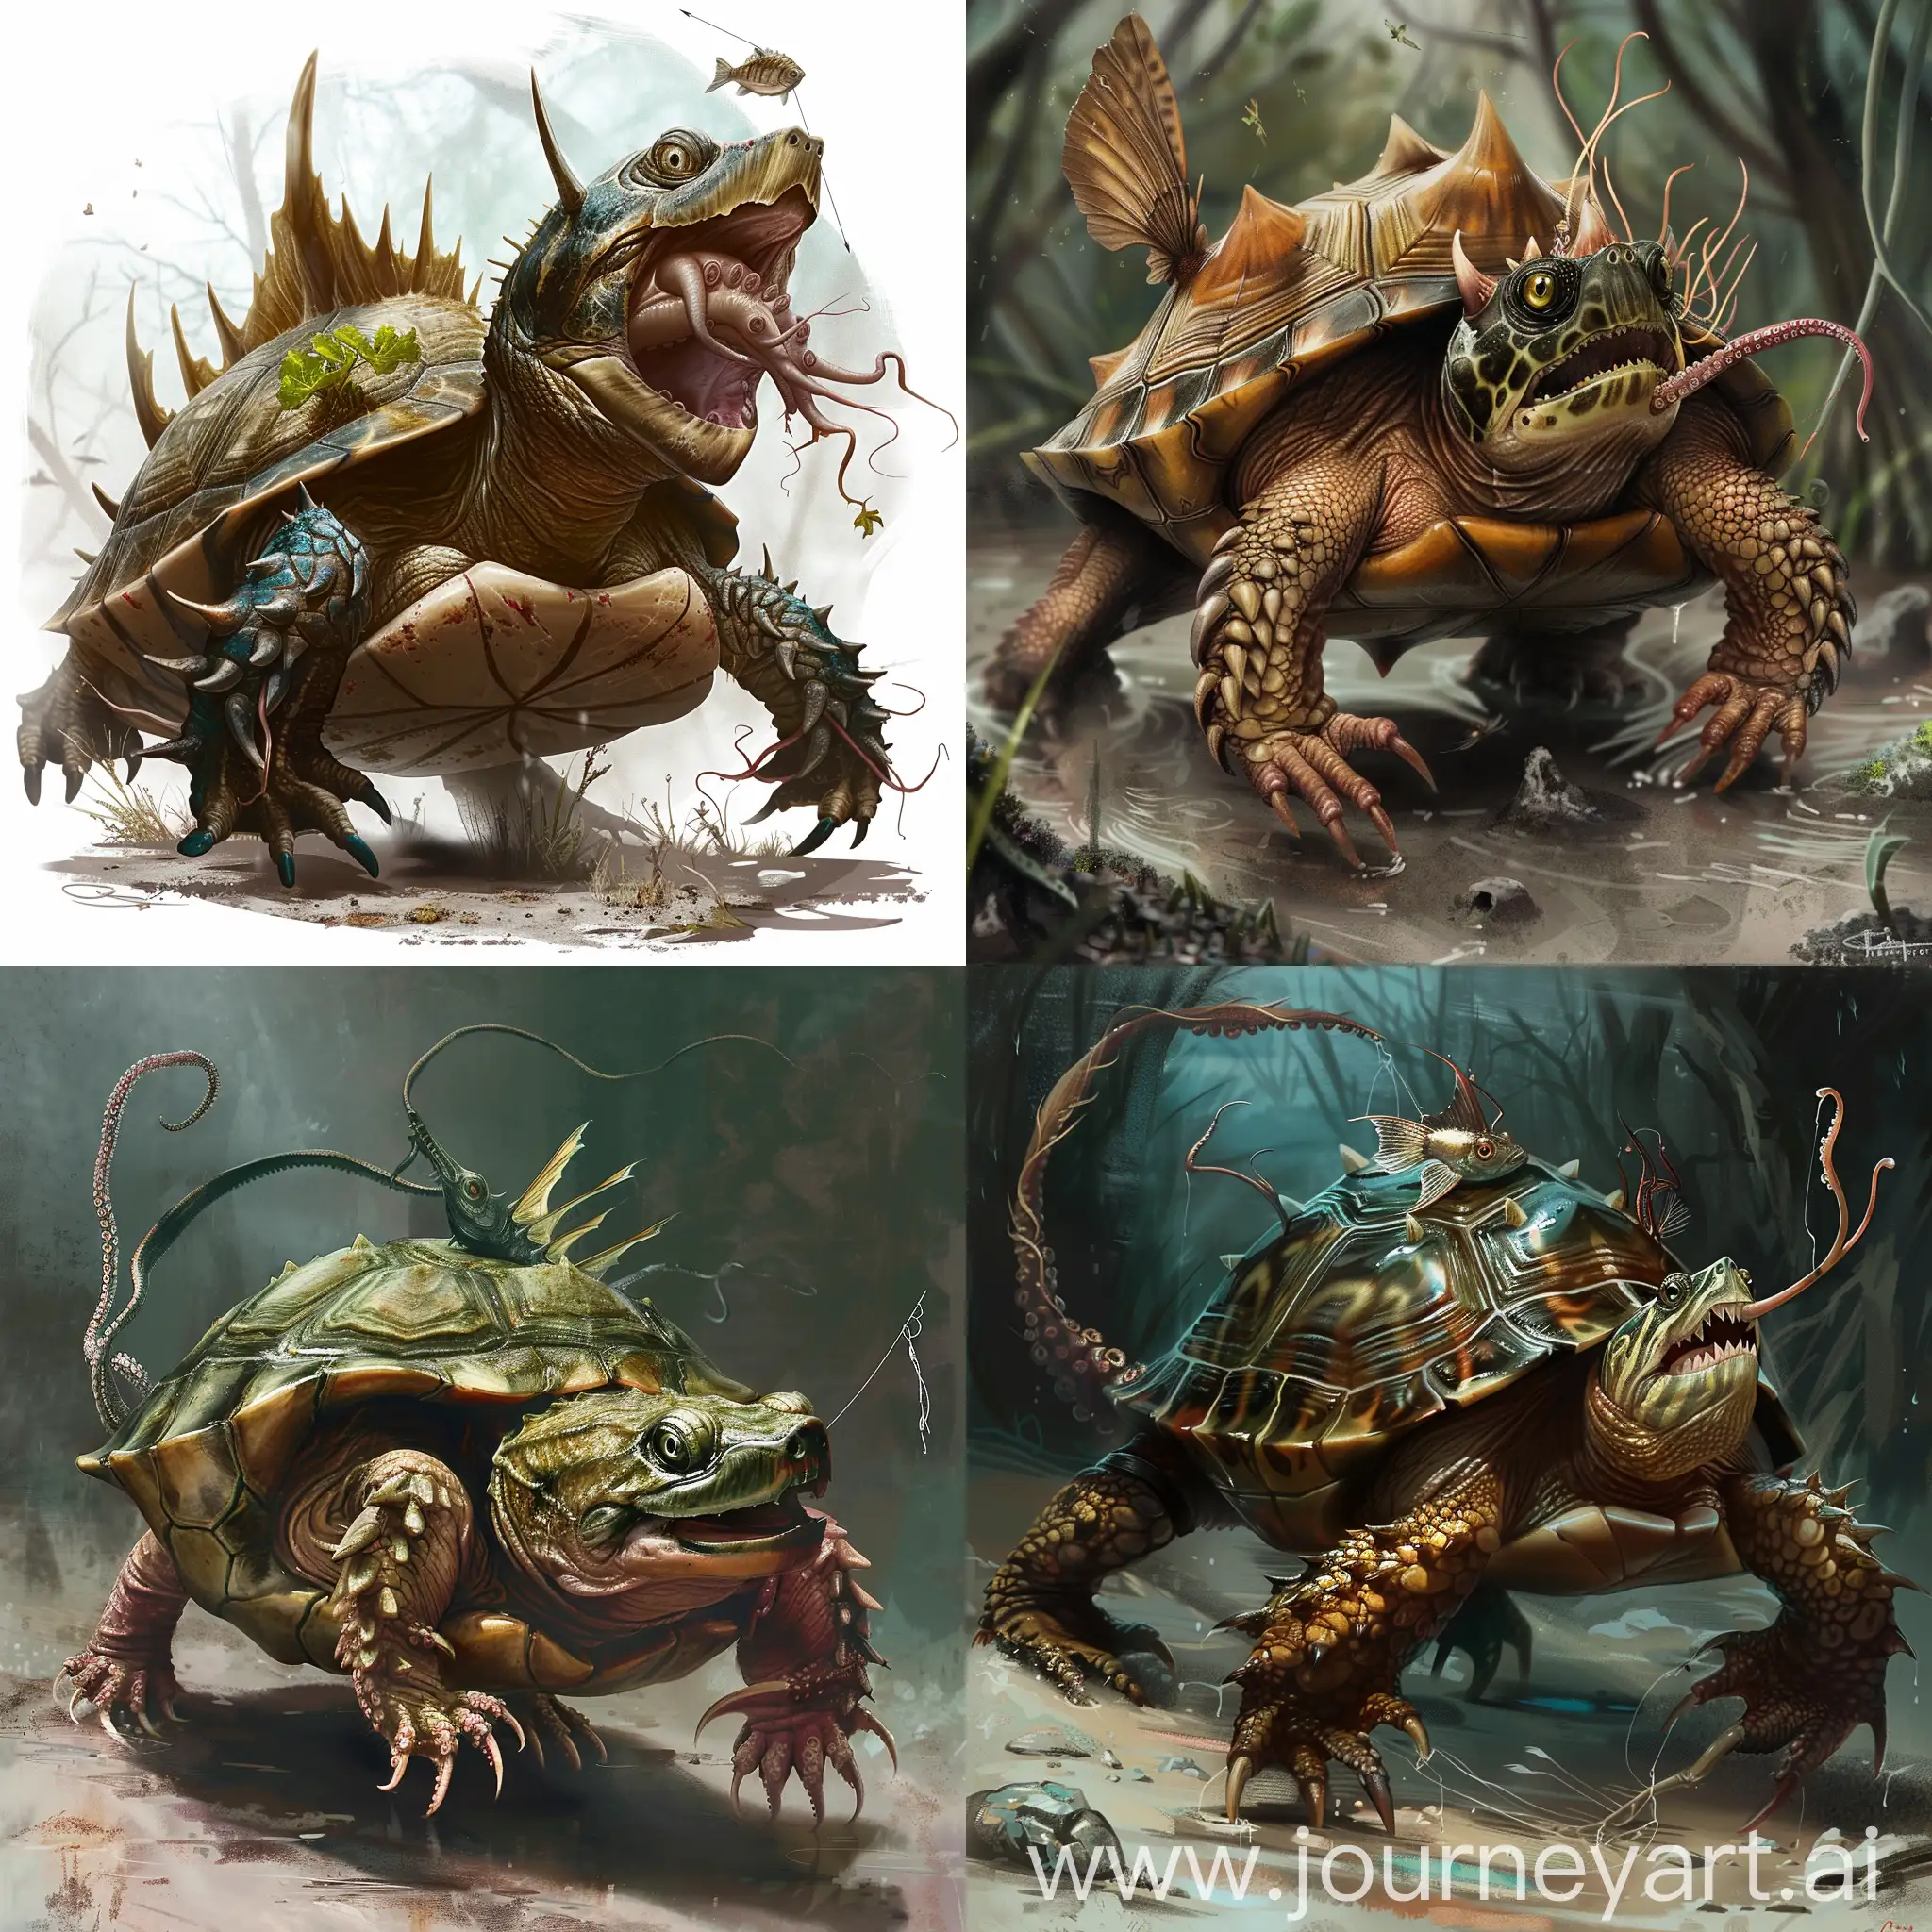 A snapping turtle which has an angler fish head and tentacles instead of legs, in the style of Dungeons and Dragons fantasy art